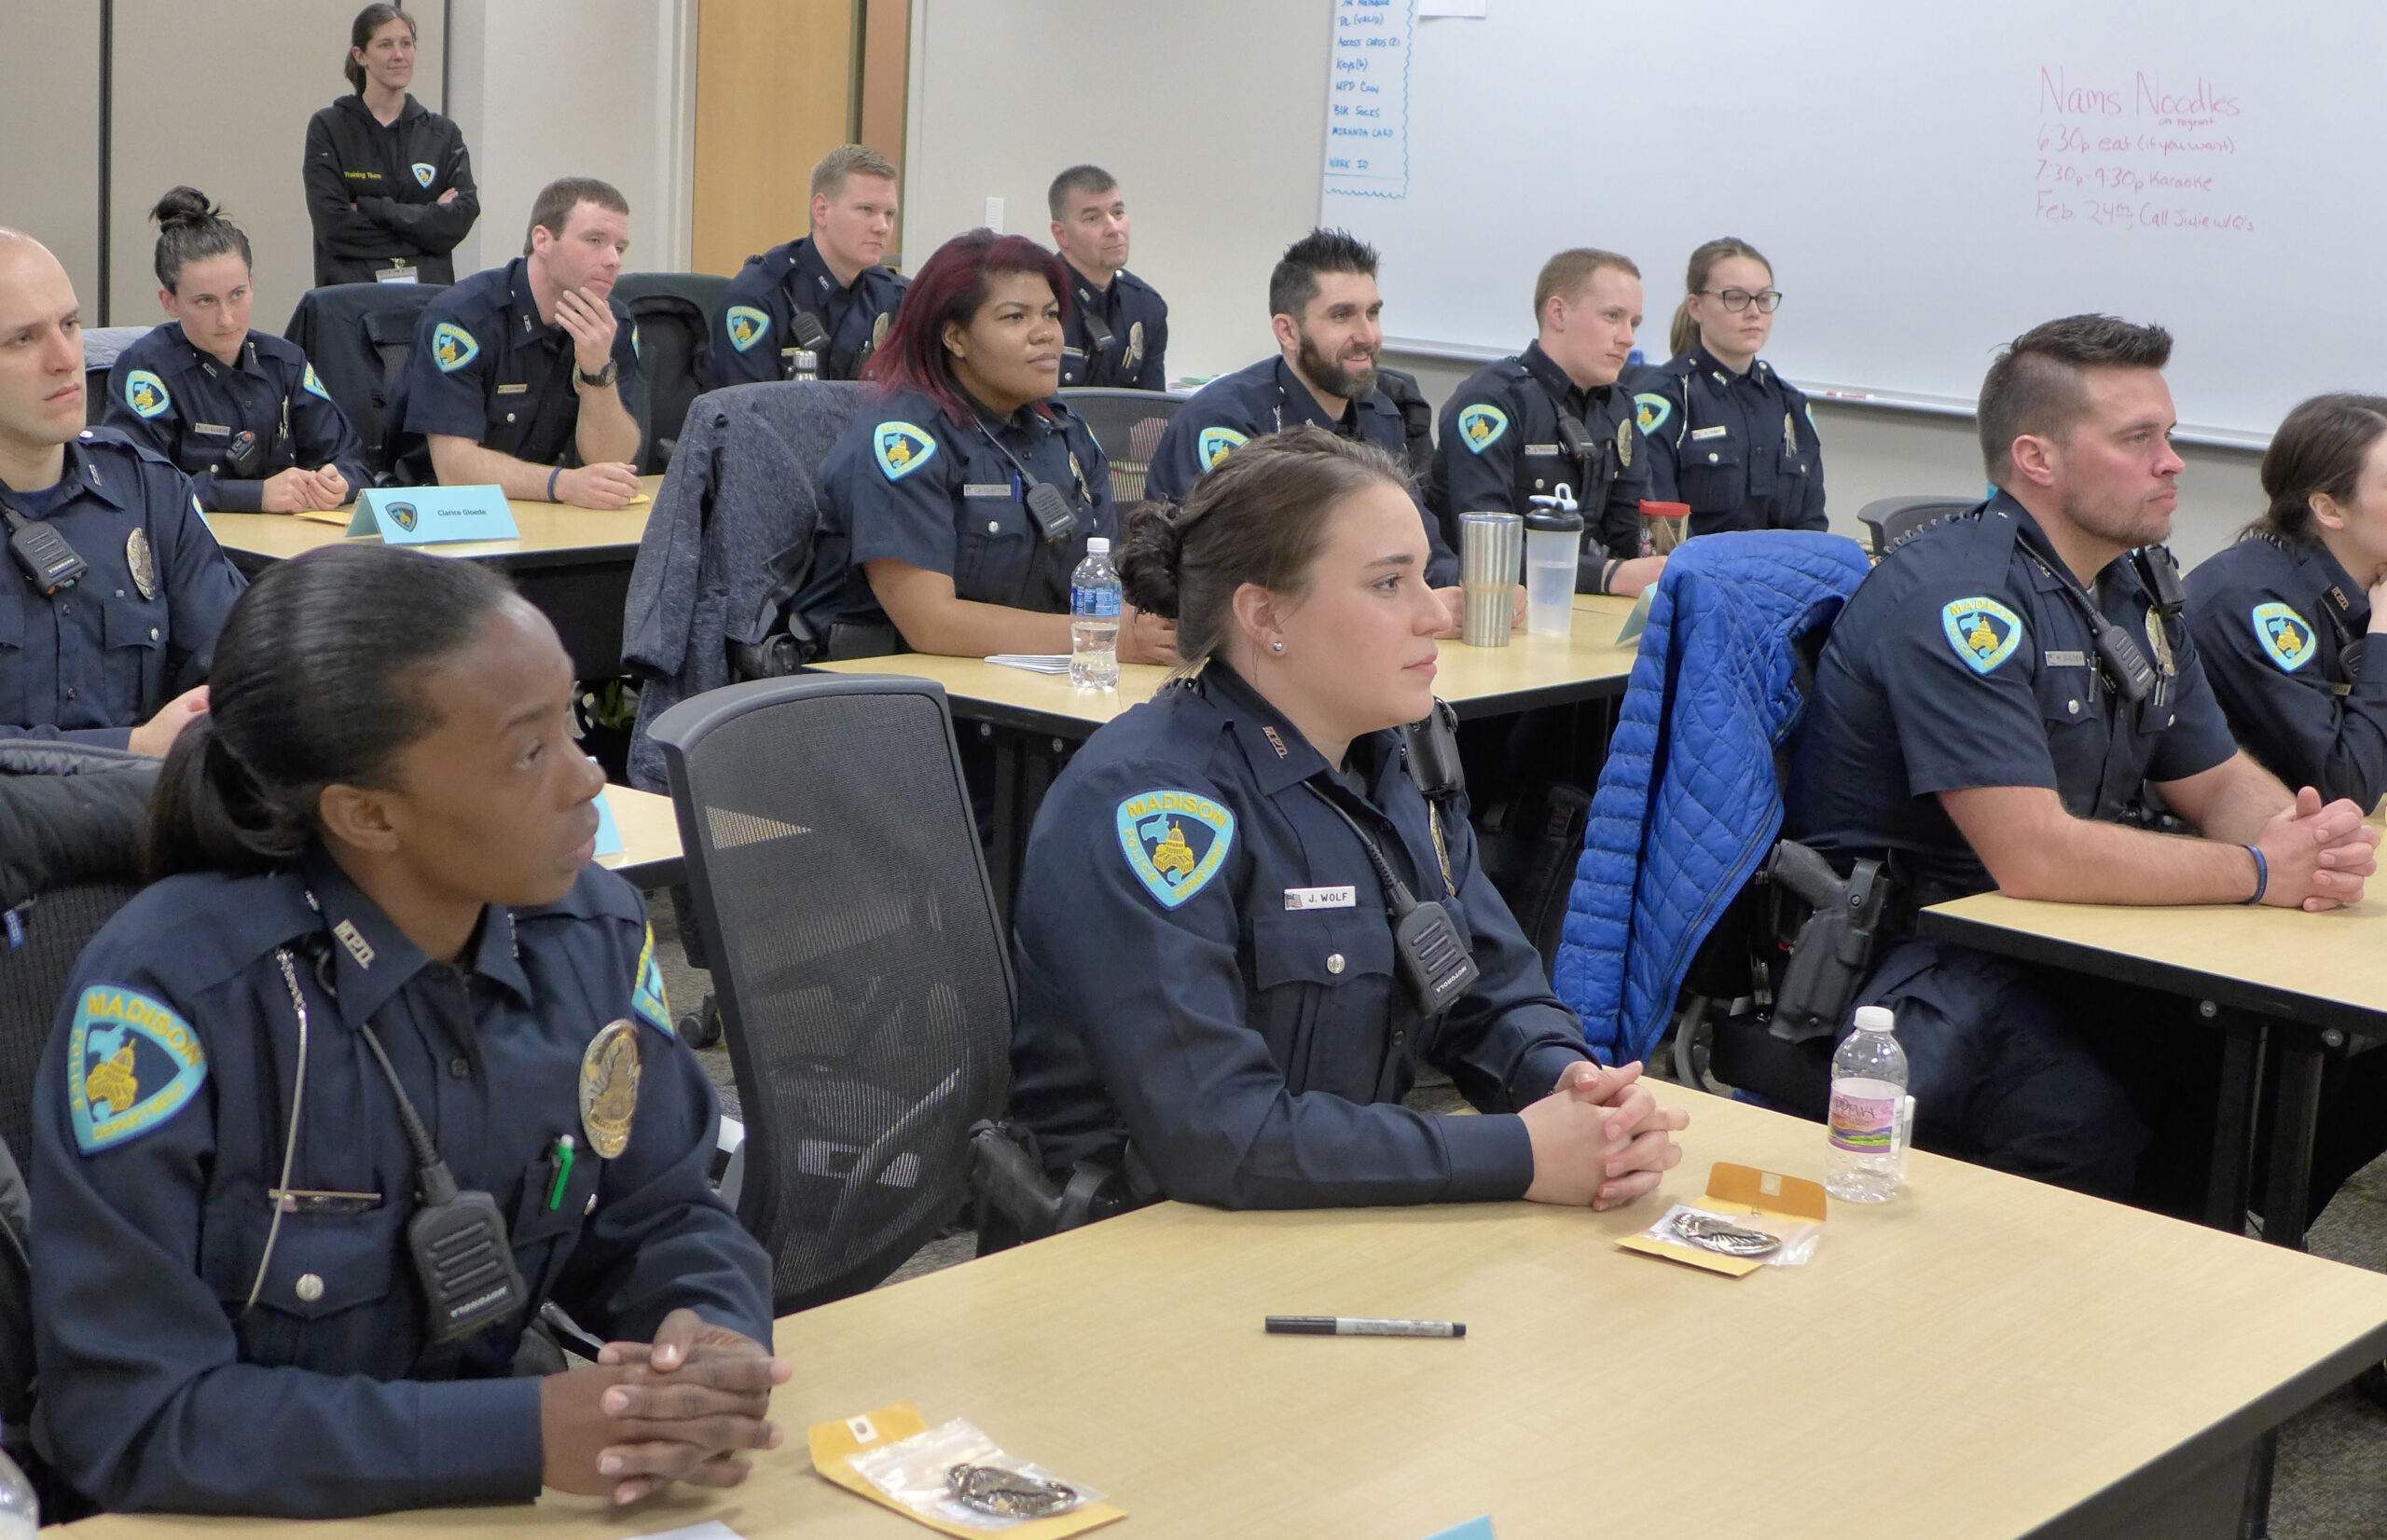 Recruits of the 59th class of the Madison Police Training Academy in the classroom.